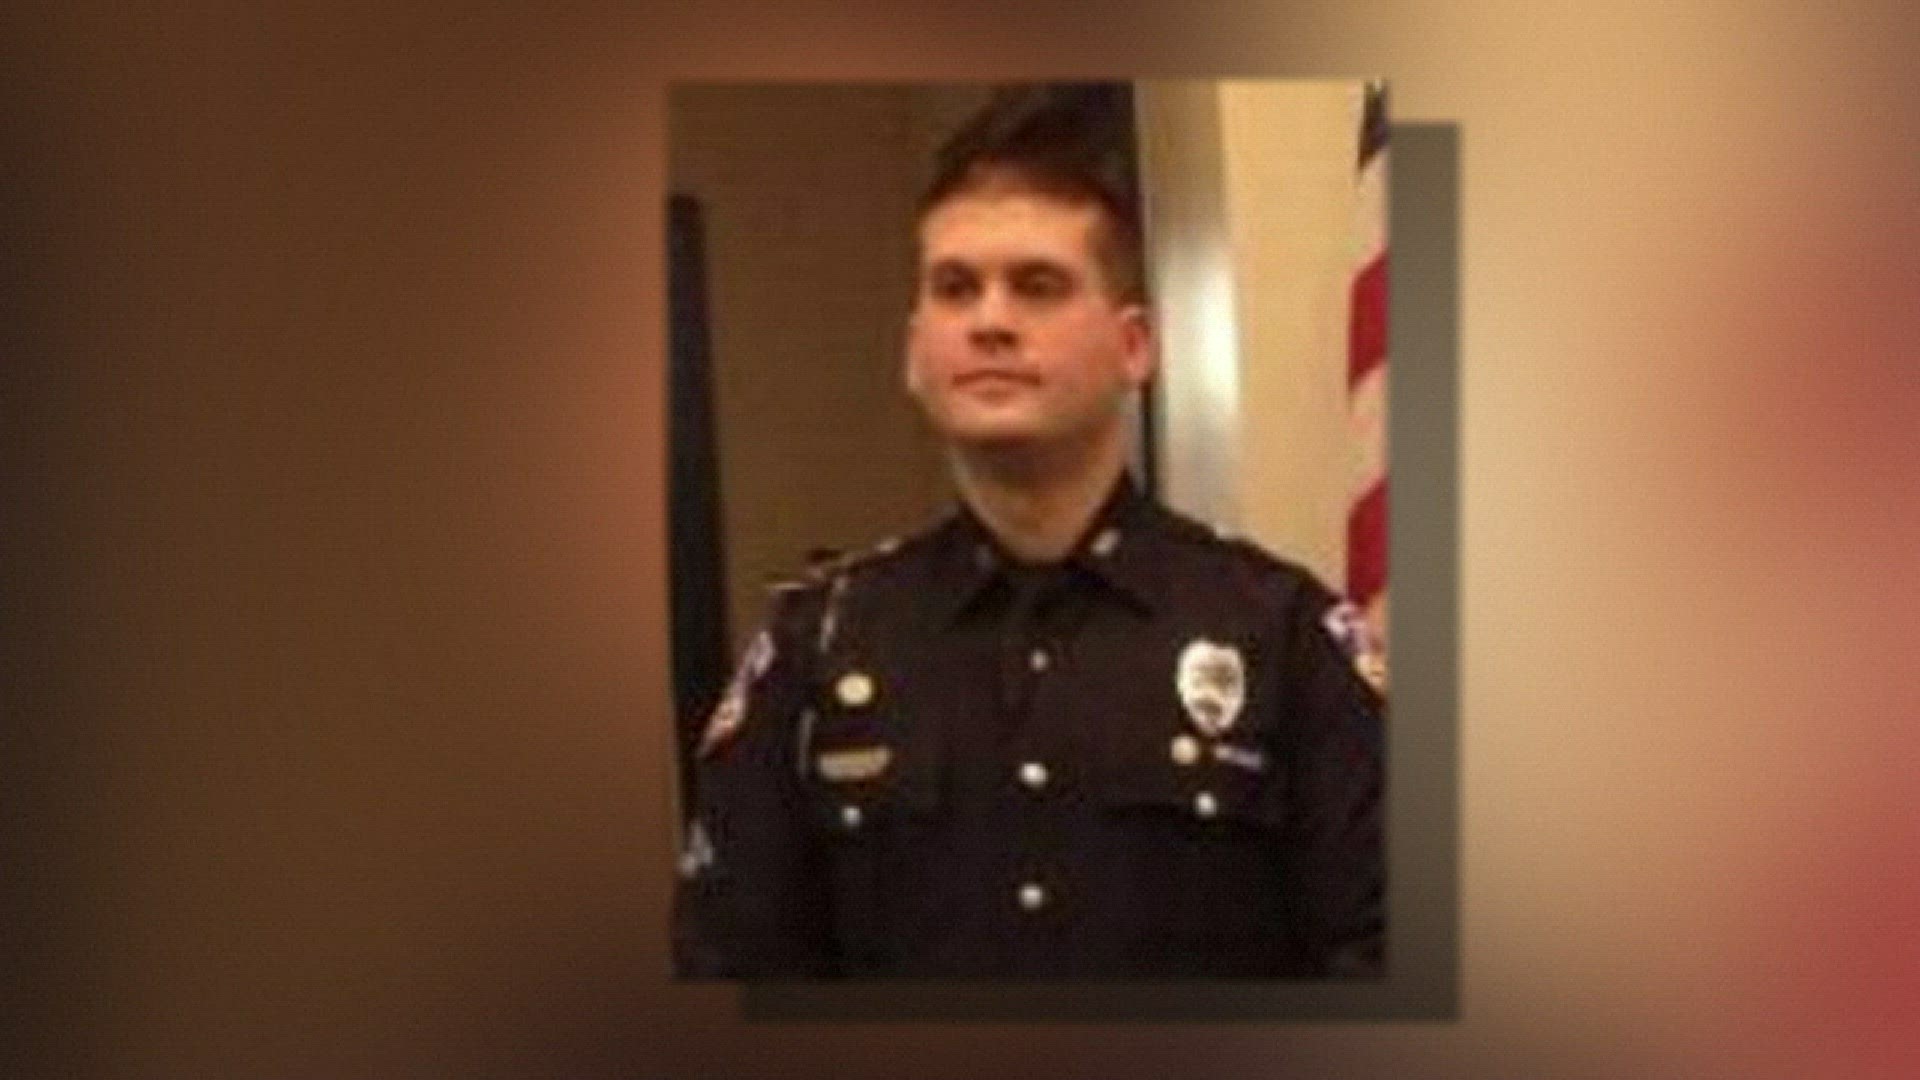 Officer Scotty Hamilton died after he was shot while conducting a criminal investigation.